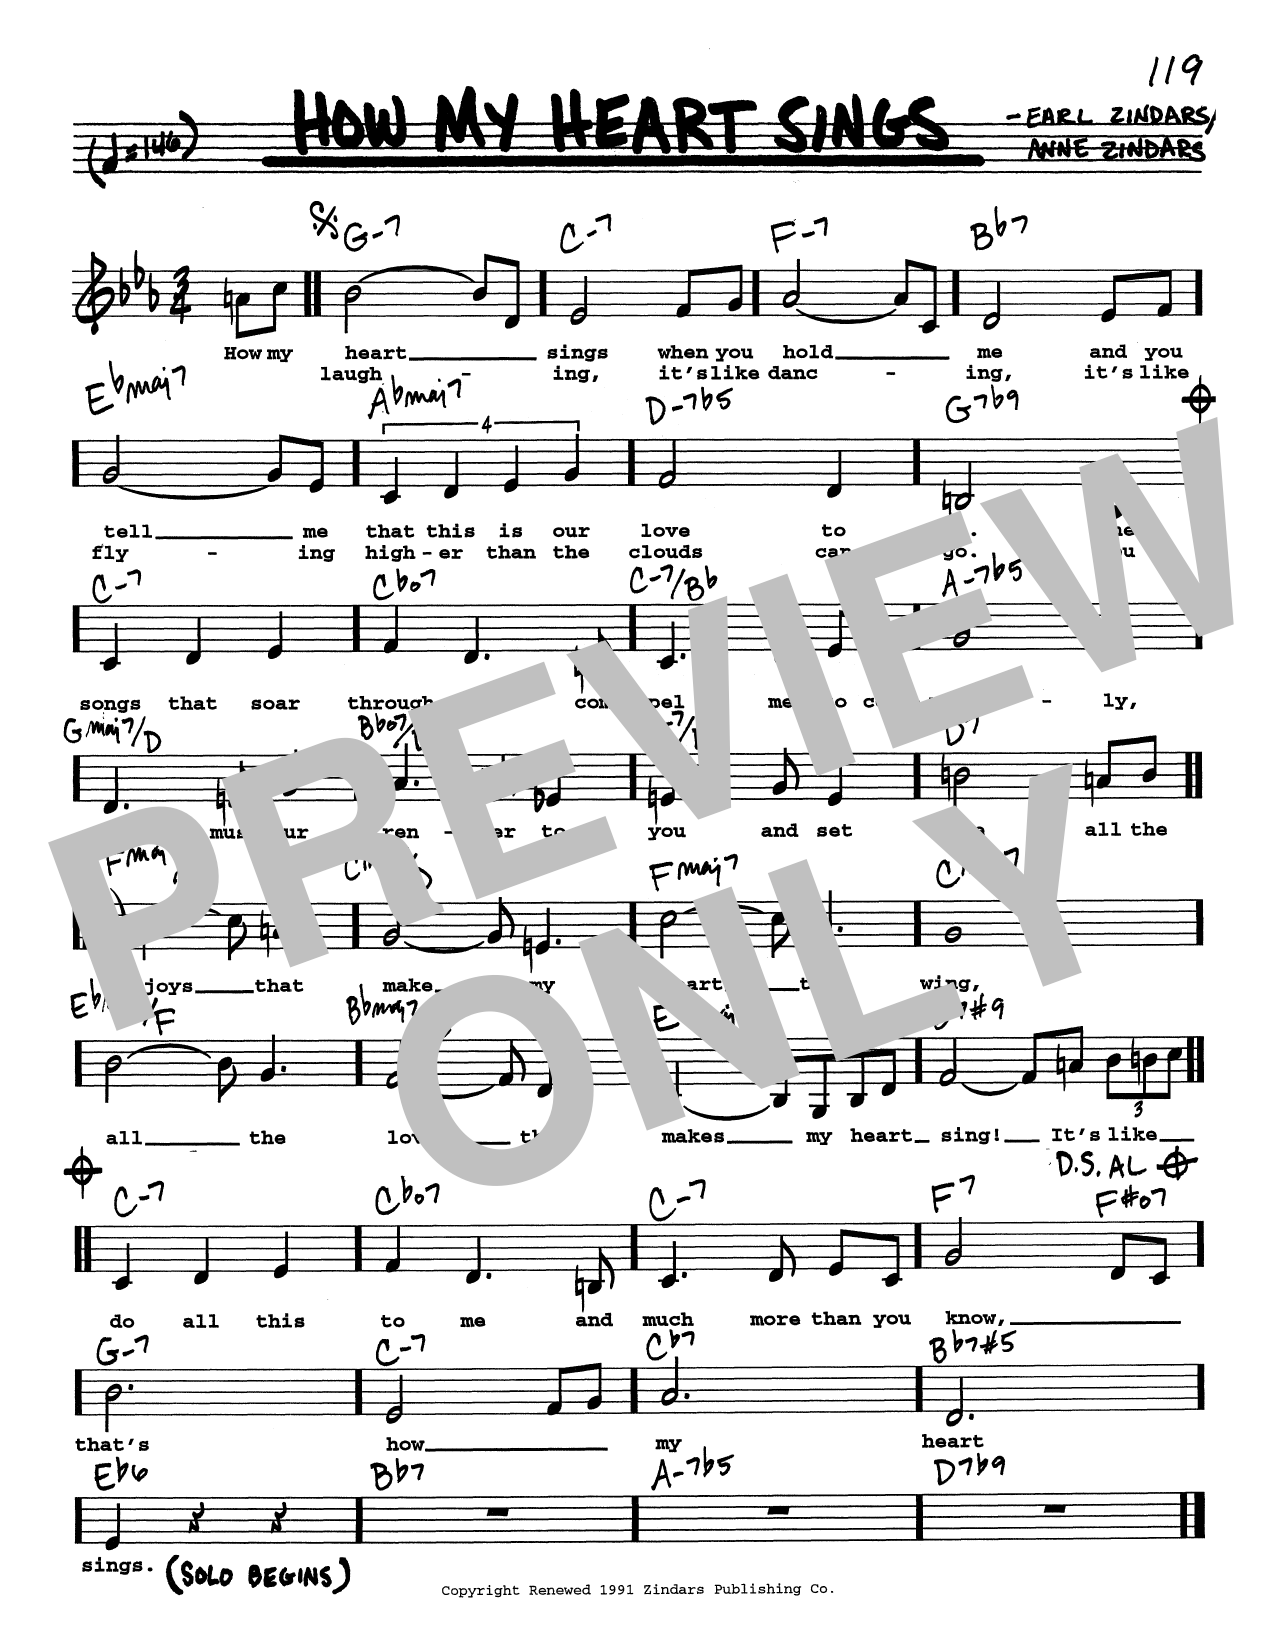 Earl Zindars How My Heart Sings (Low Voice) sheet music notes printable PDF score